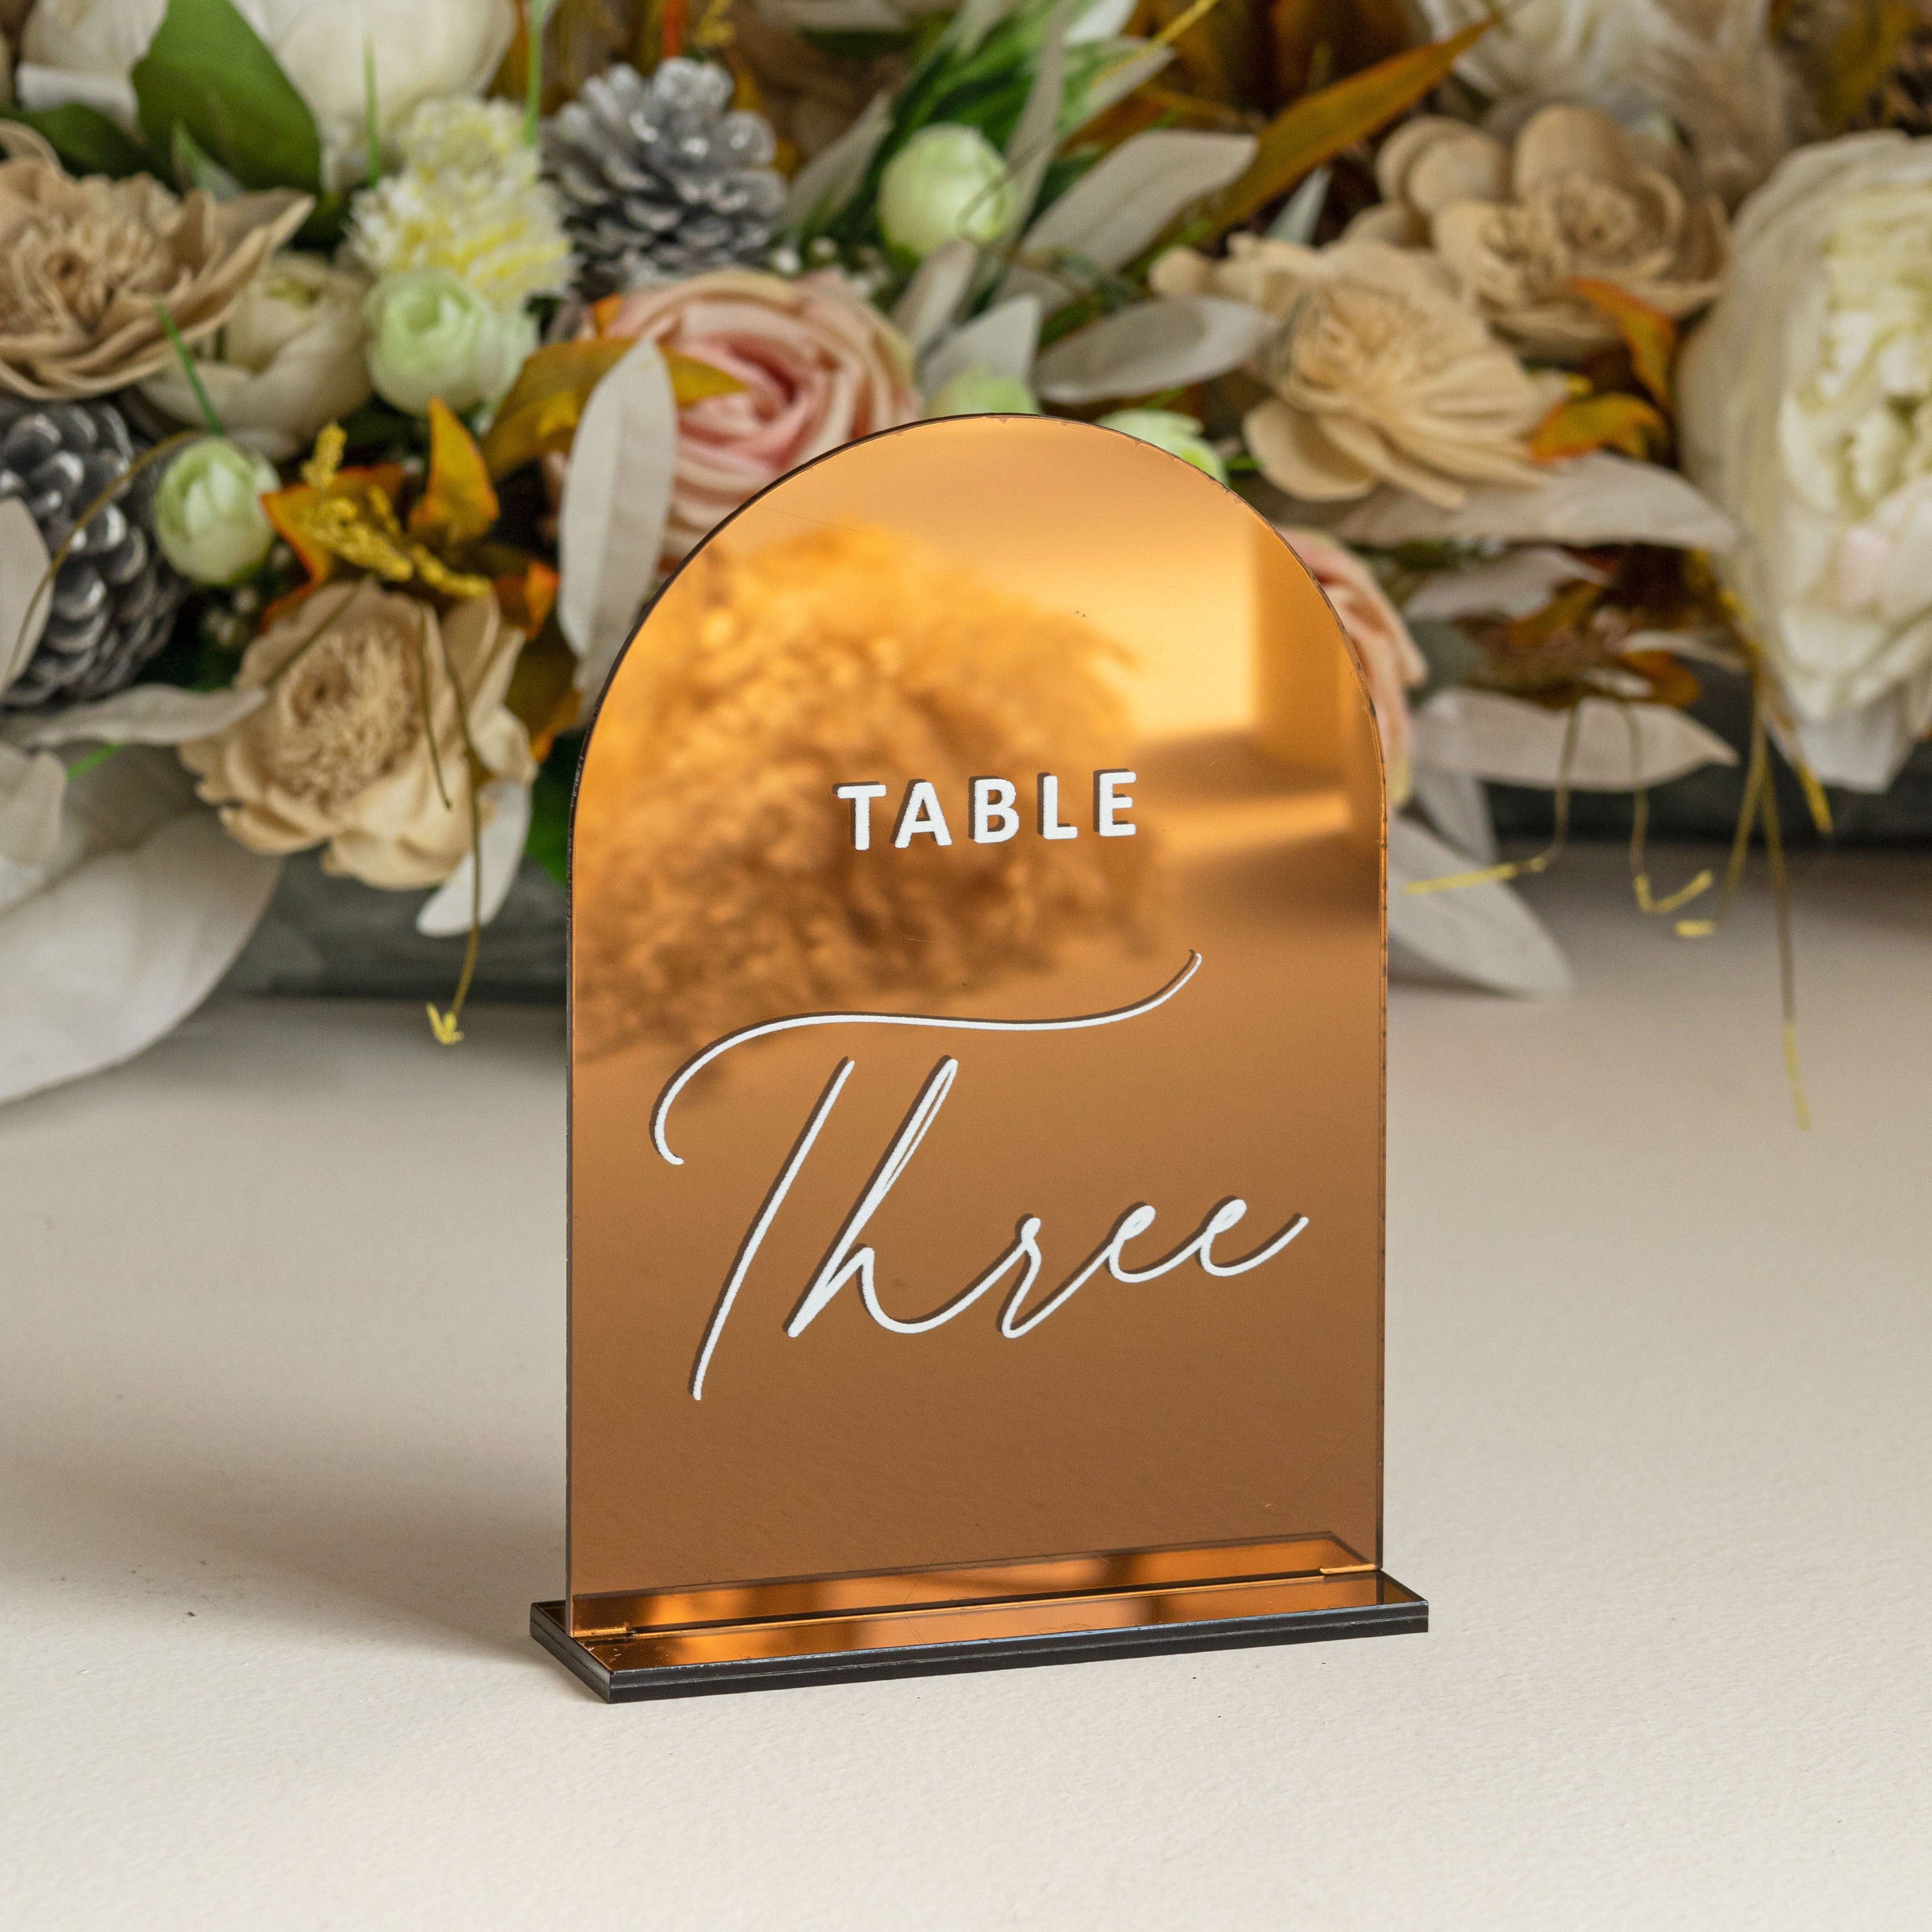 Mirror Copper Table Numbers | Arch Table Numbers | Acrylic Table Numbers | Table Number Wedding , Wedding table decorations, Copper weddings